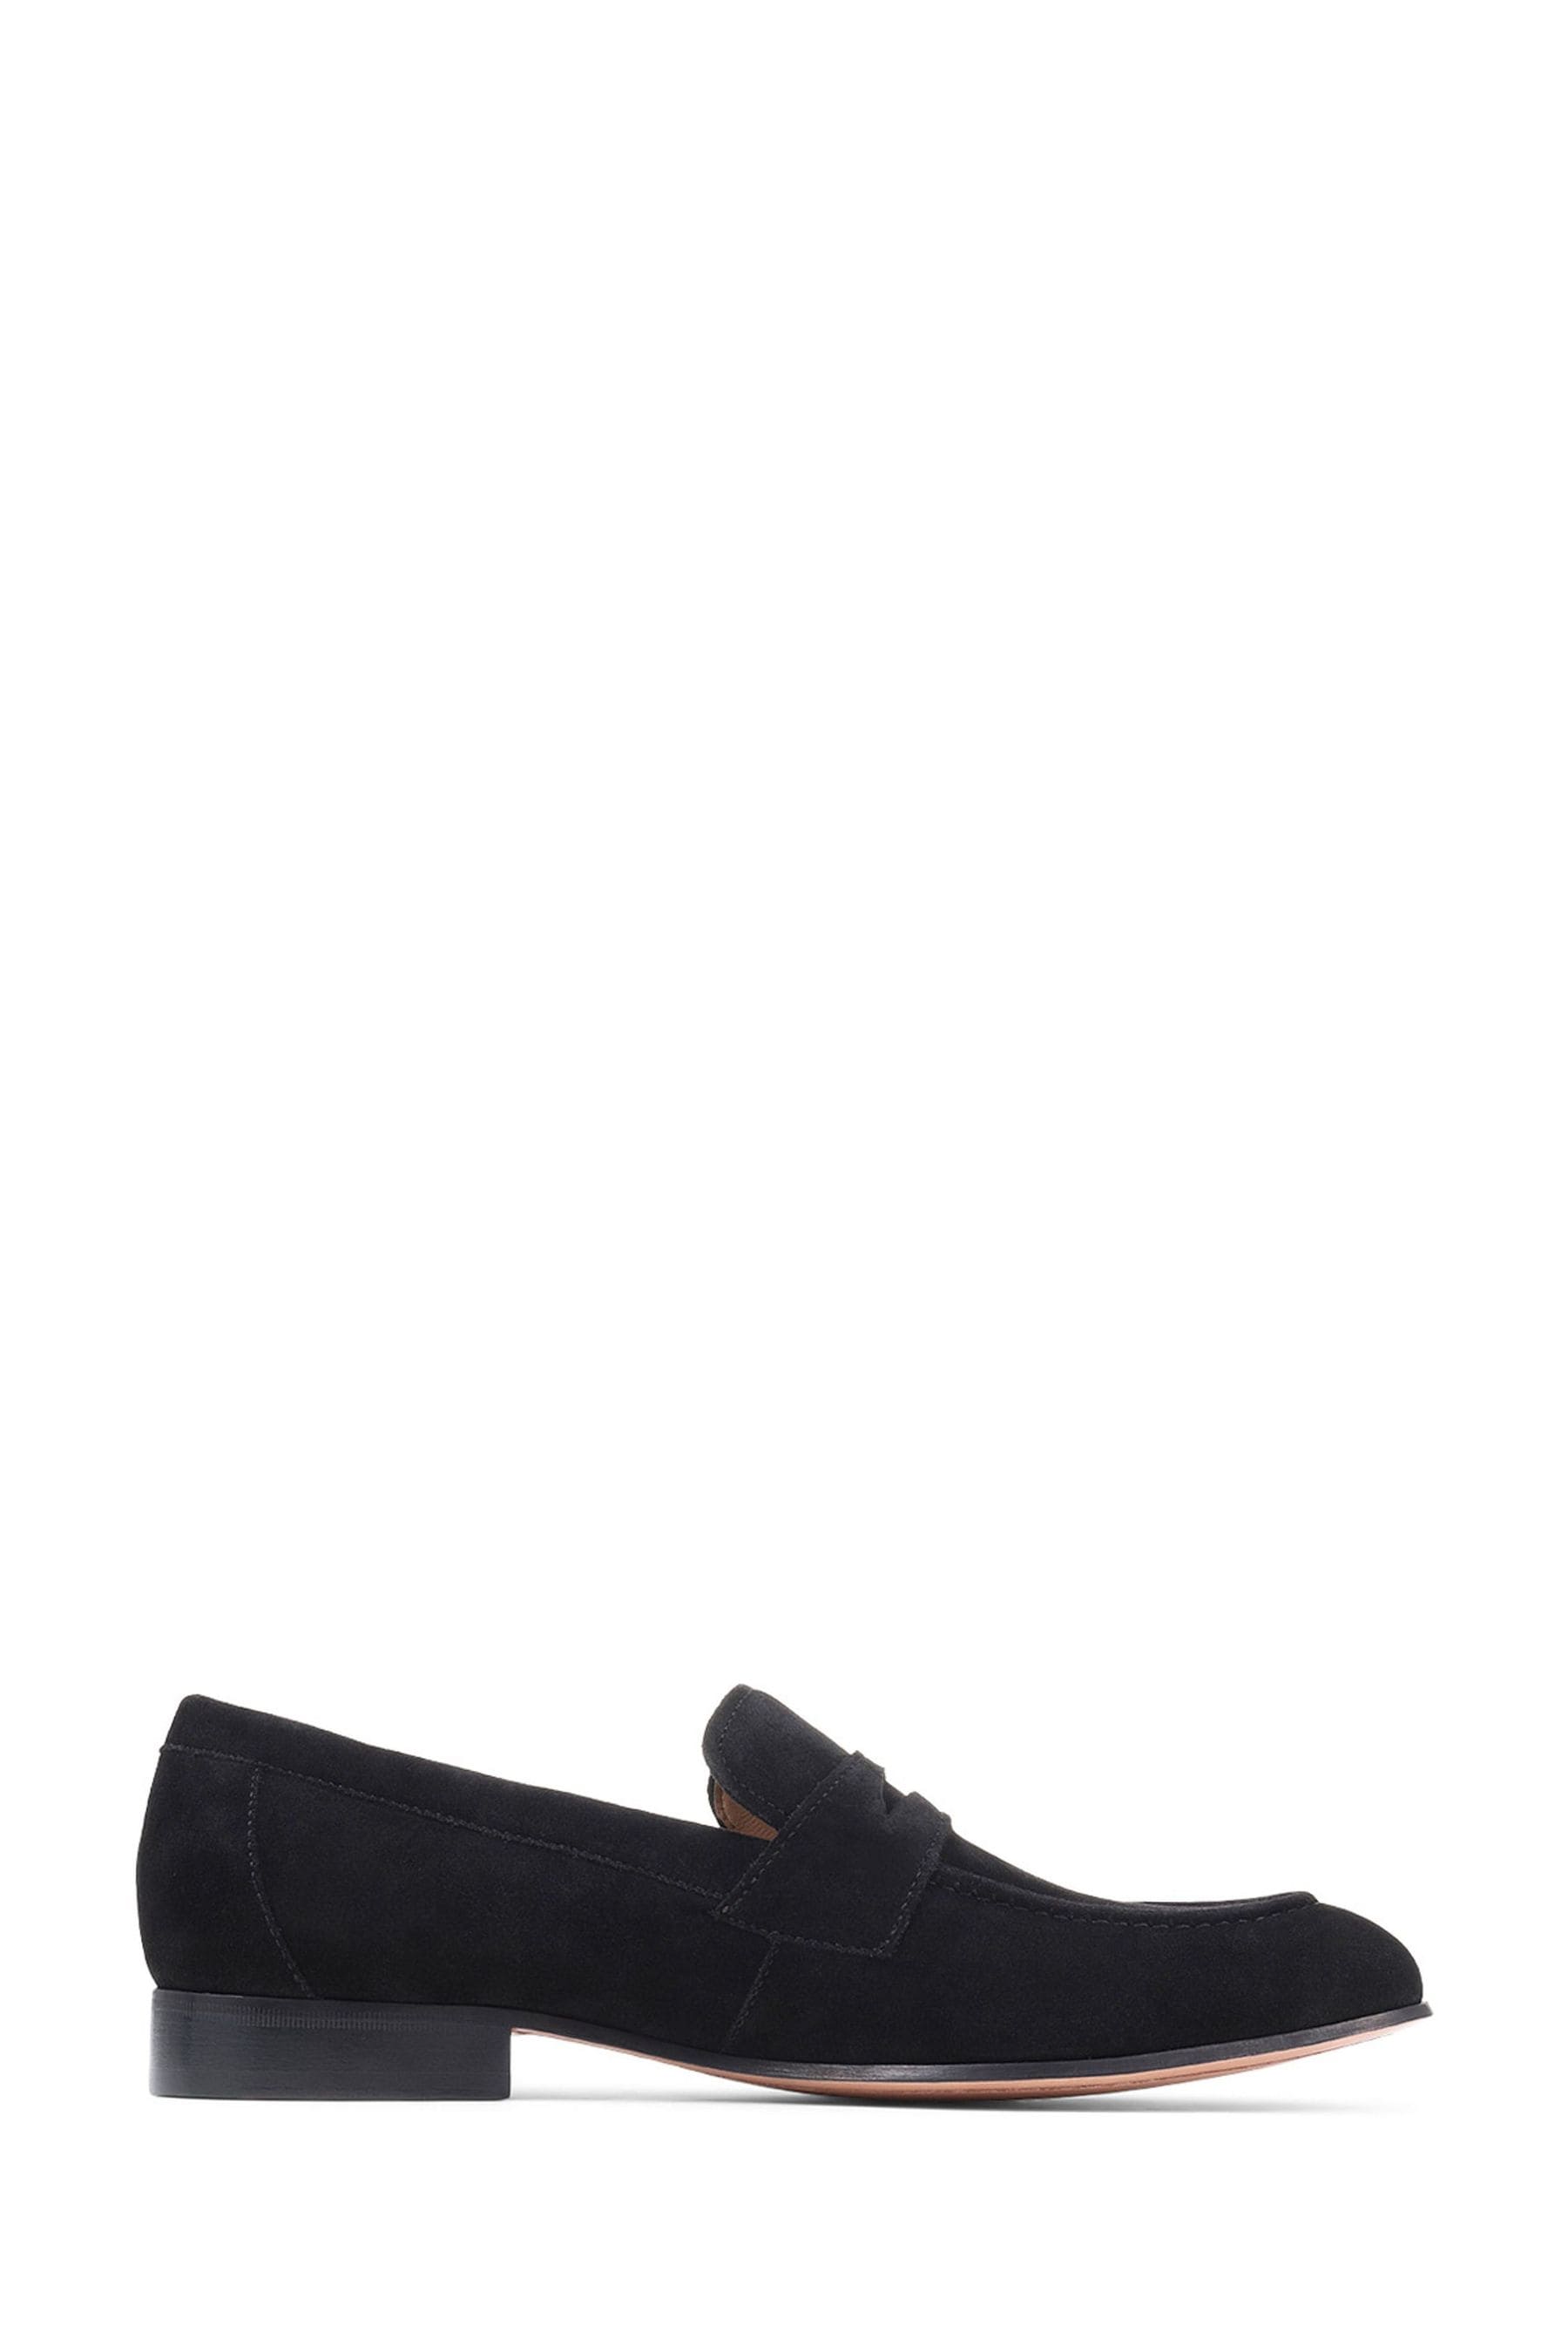 Buy Jones Bootmaker Black Roscoe Suede Penny Loafers from the Next UK ...